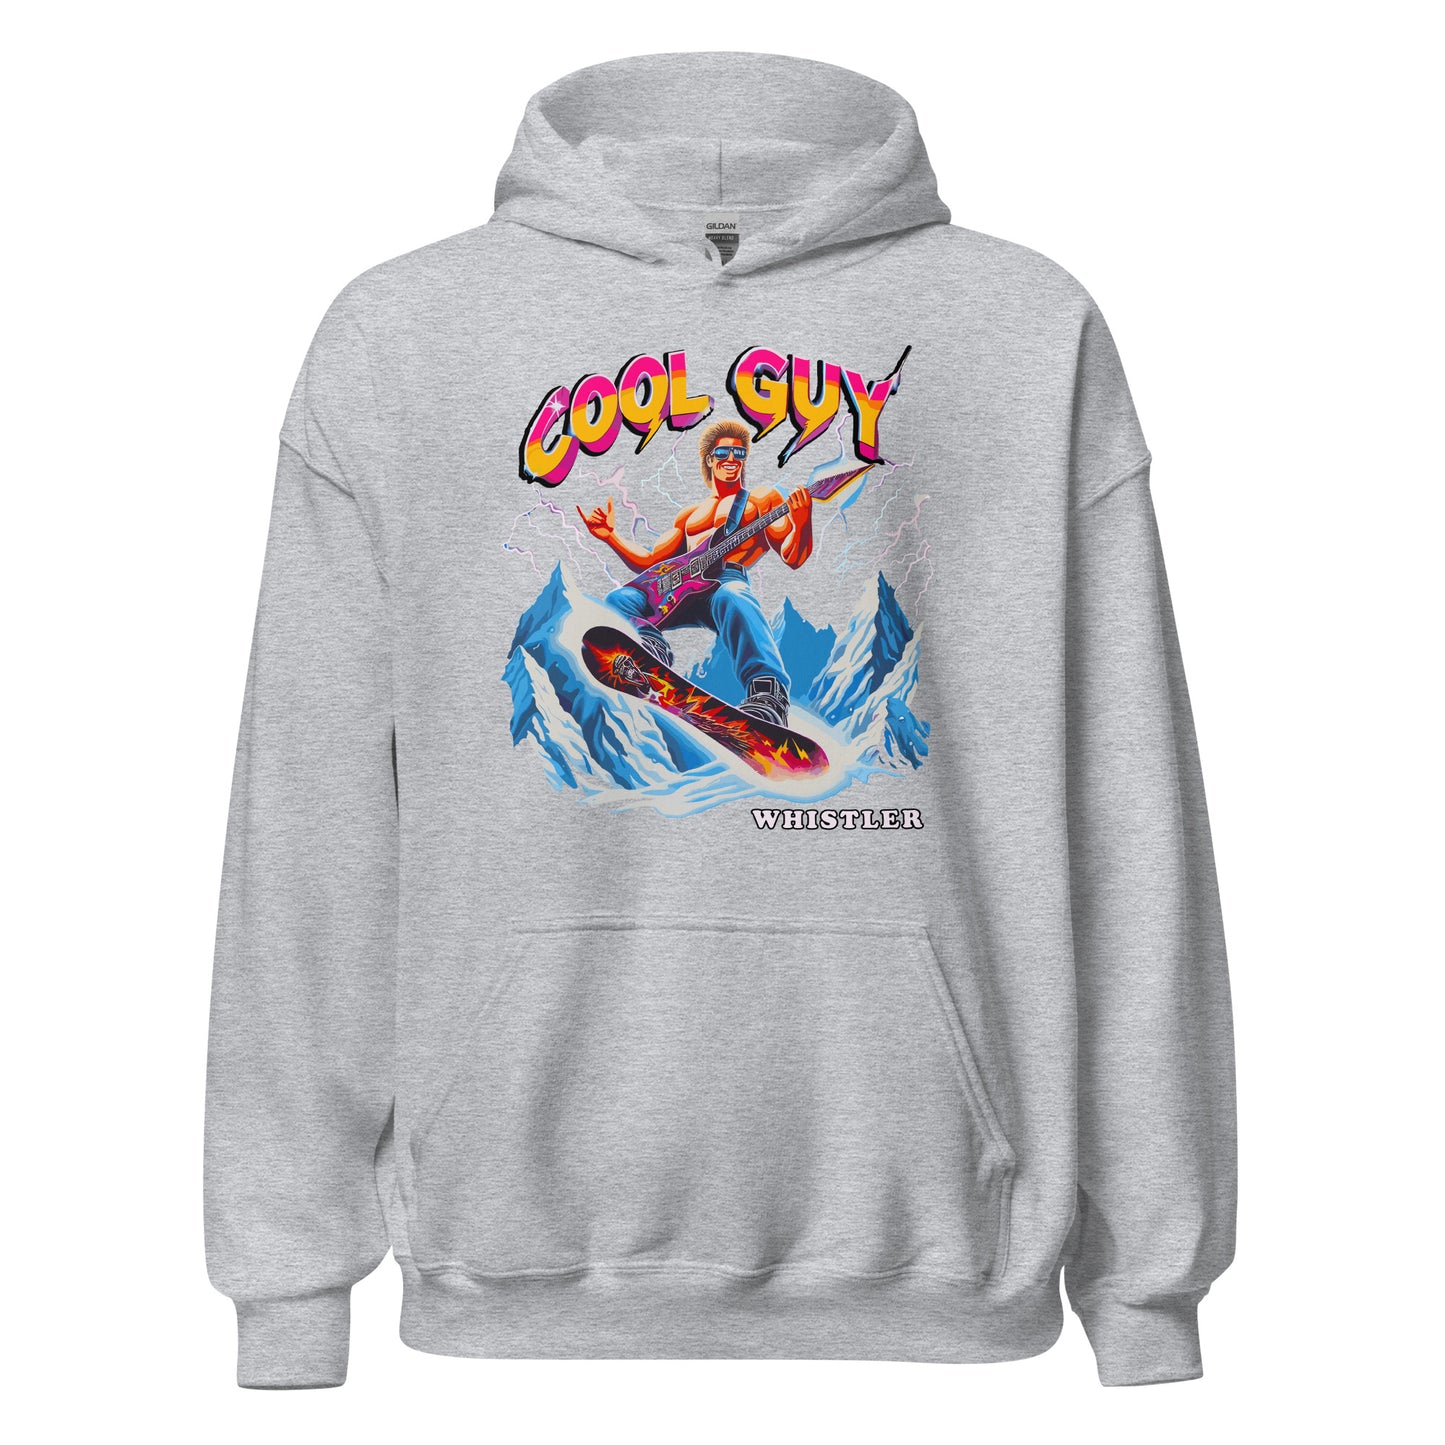 Cool Guy Whistler Hoodie printed by Whistler Shirts